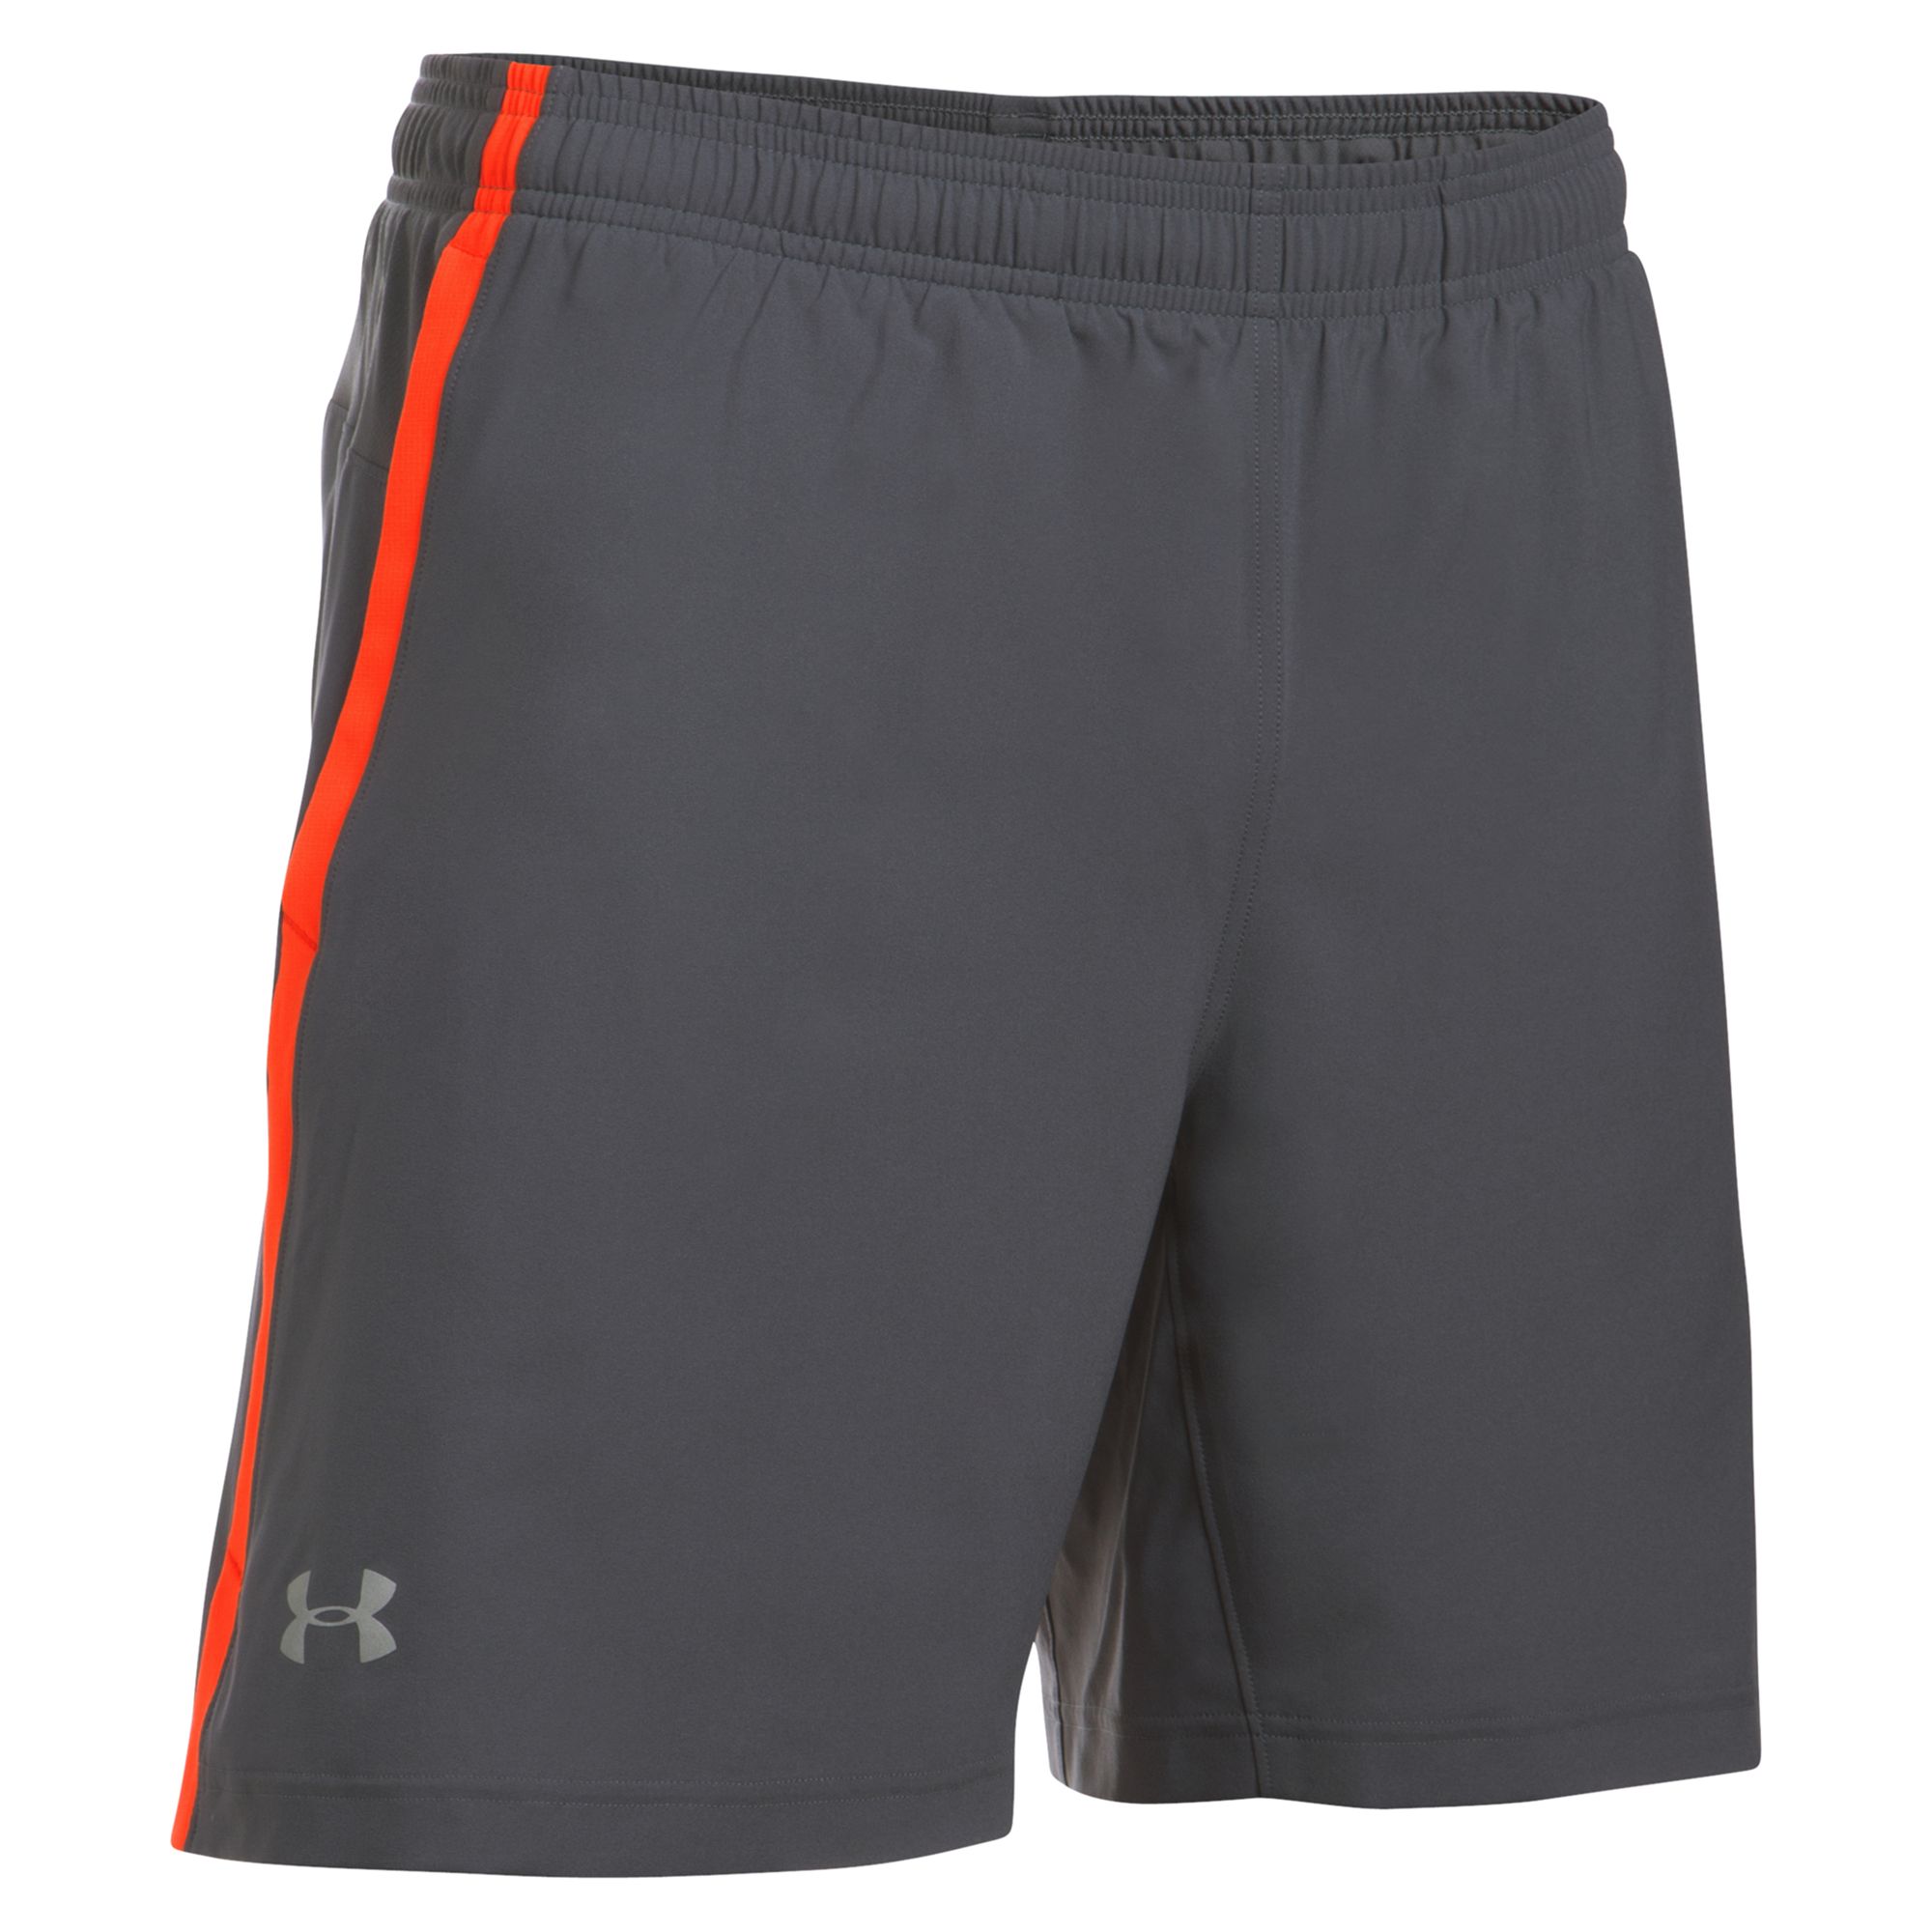 Under Armour Launch 2-in-1 Running Shorts, Grey